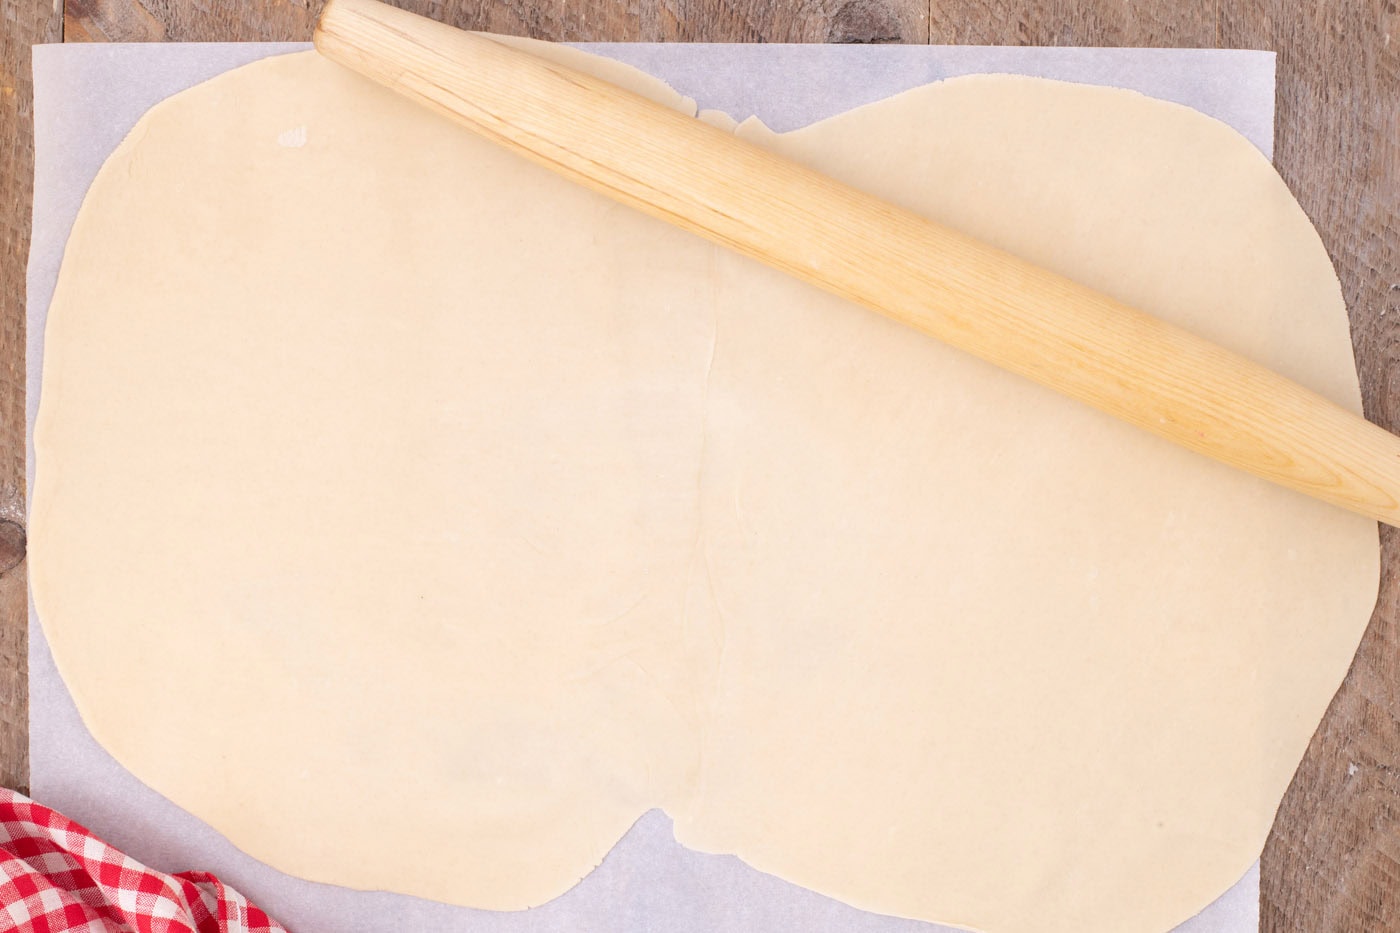 rolling together premade pie crusts with a rolling pin